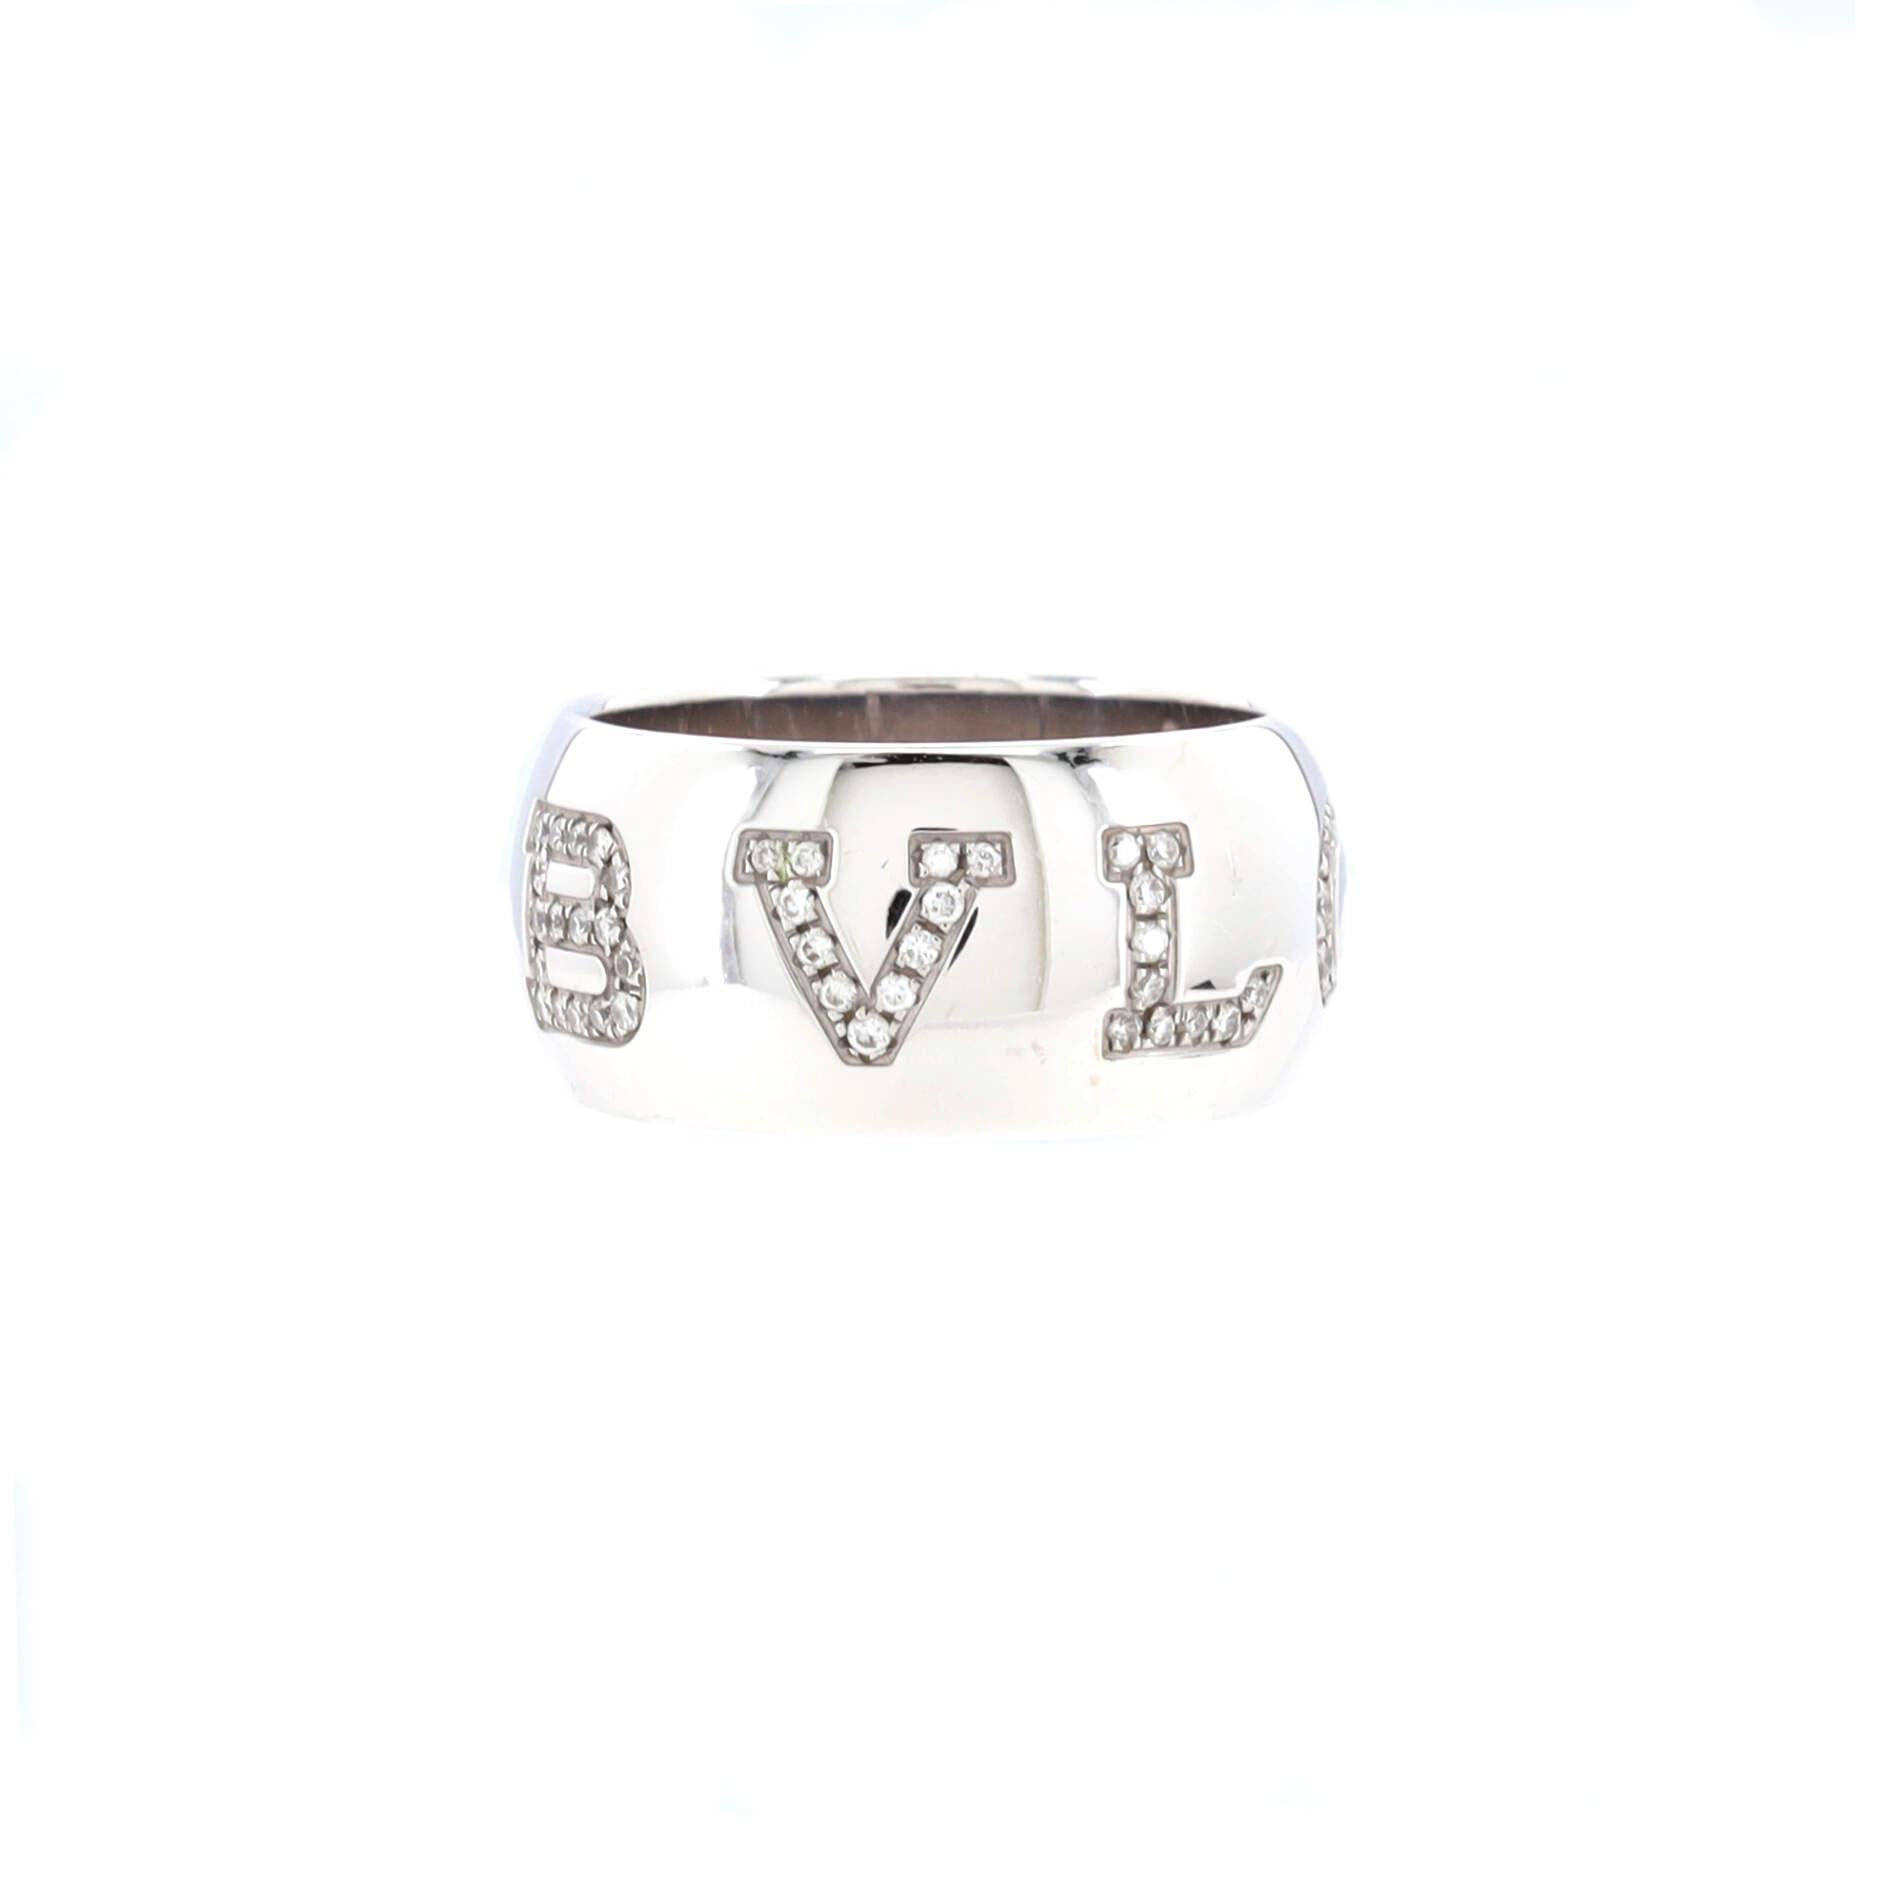 Condition: Great. Moderate wear throughout.
Accessories: No Accessories
Measurements: Size: 6.75 - 54, Width: 10.00 mm
Designer: Bvlgari
Model: Monologo Ring 18K White Gold with Diamonds
Exterior Color: White Gold
Item Number: 175154/13